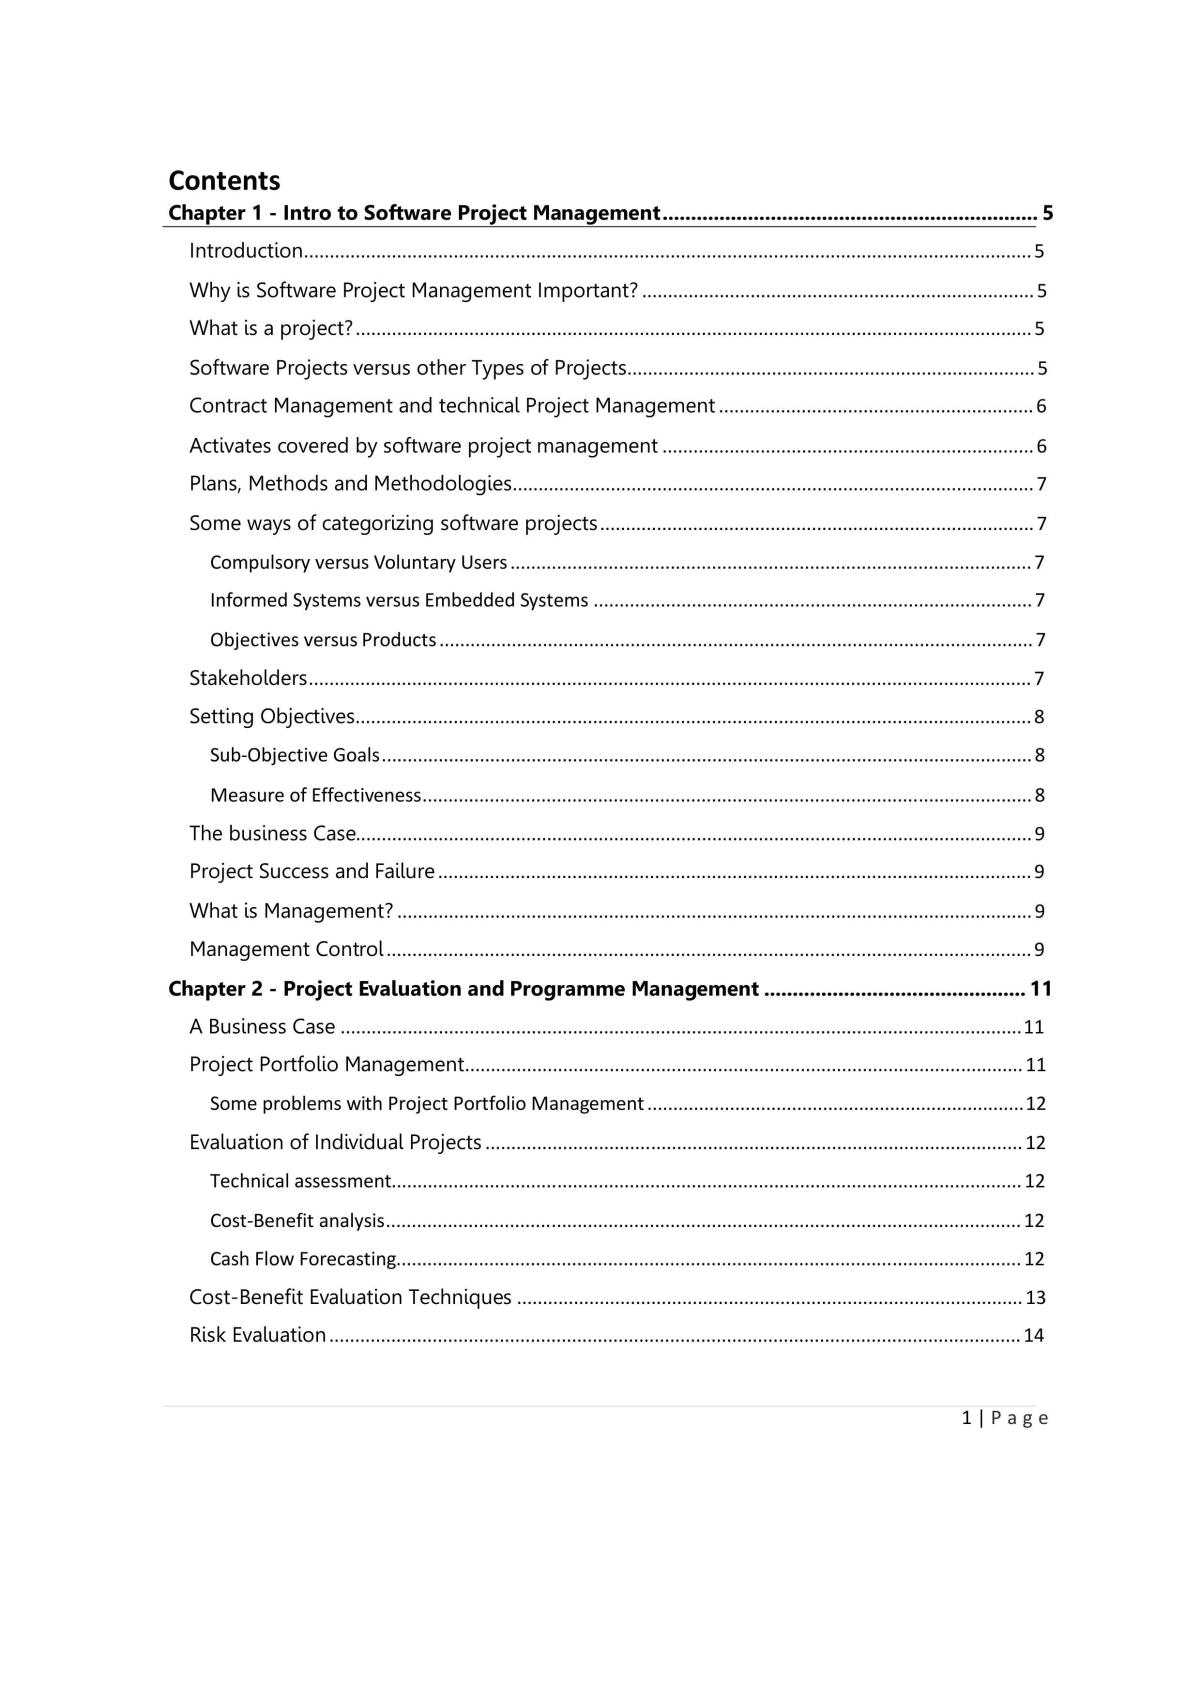 Bachelor of Science Honours in Computing Course Notes - Page 1